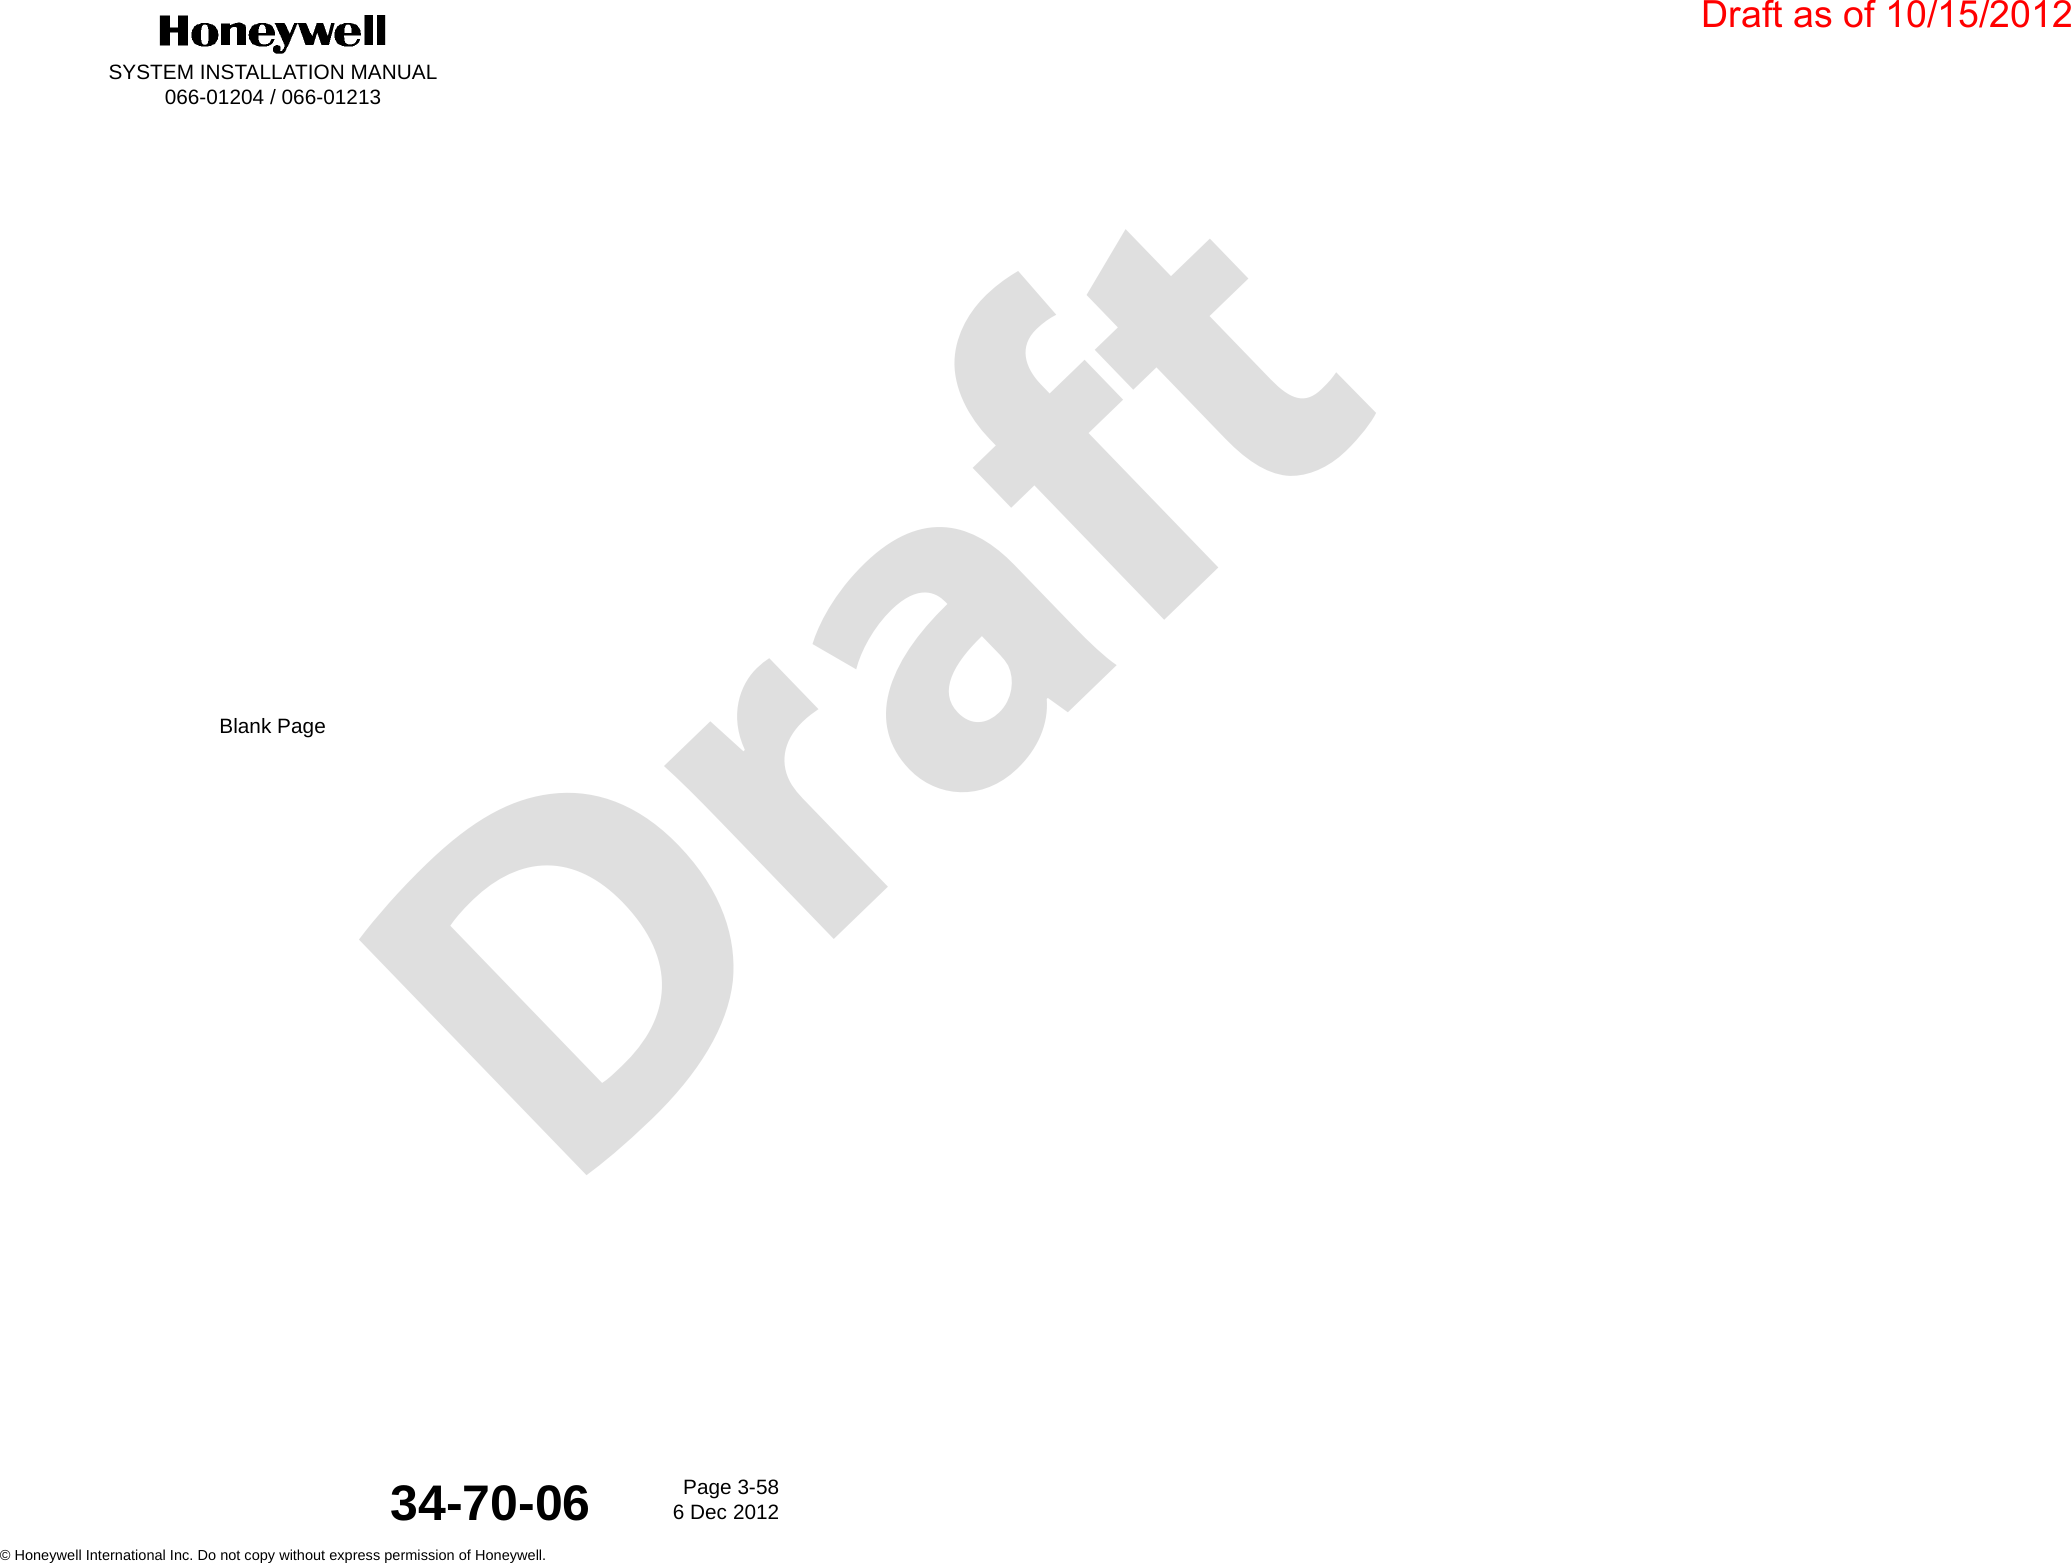 DraftSYSTEM INSTALLATION MANUAL066-01204 / 066-01213Page 3-586 Dec 2012© Honeywell International Inc. Do not copy without express permission of Honeywell.34-70-06Blank PageDraft as of 10/15/2012